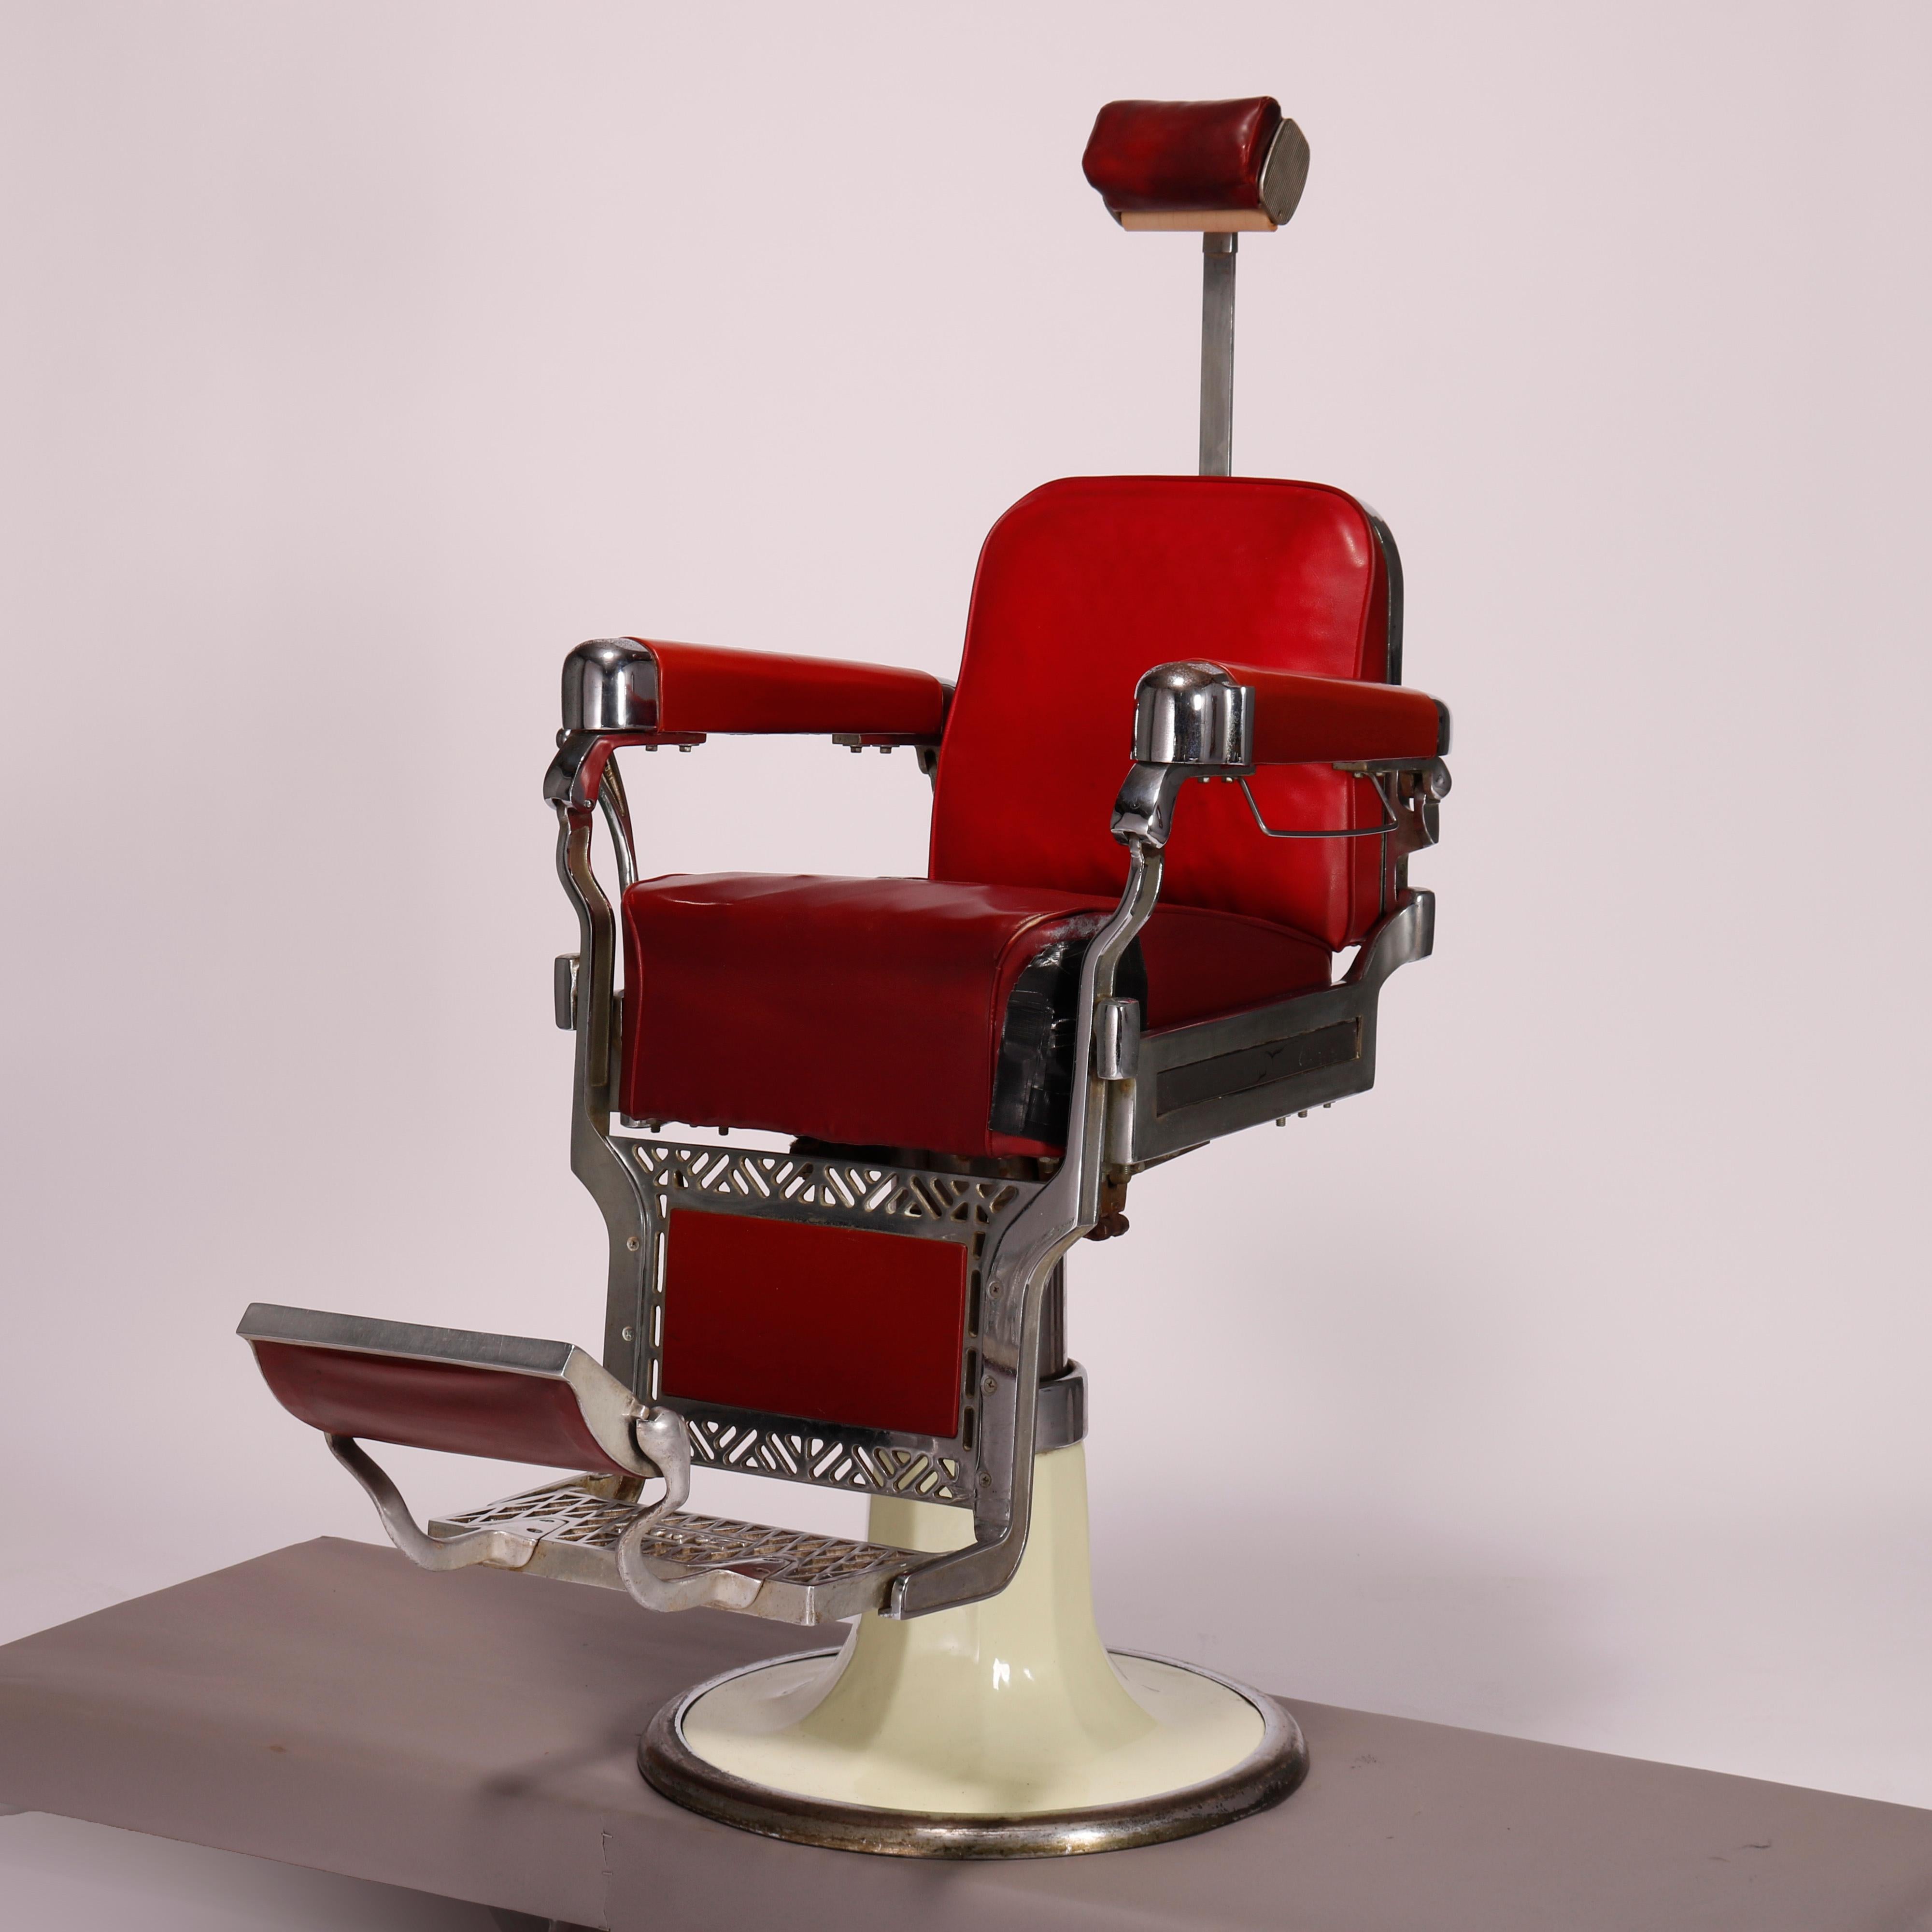 A vintage deco barber chair by Belmont offers chrome, frame with vinyl upholstery, raised on enameled cone form base, maker label as photographed, c1950

Measures - 58.5''H x 29.75''W x 47''D.

Catalogue Note: Ask about DISCOUNTED DELIVERY RATES